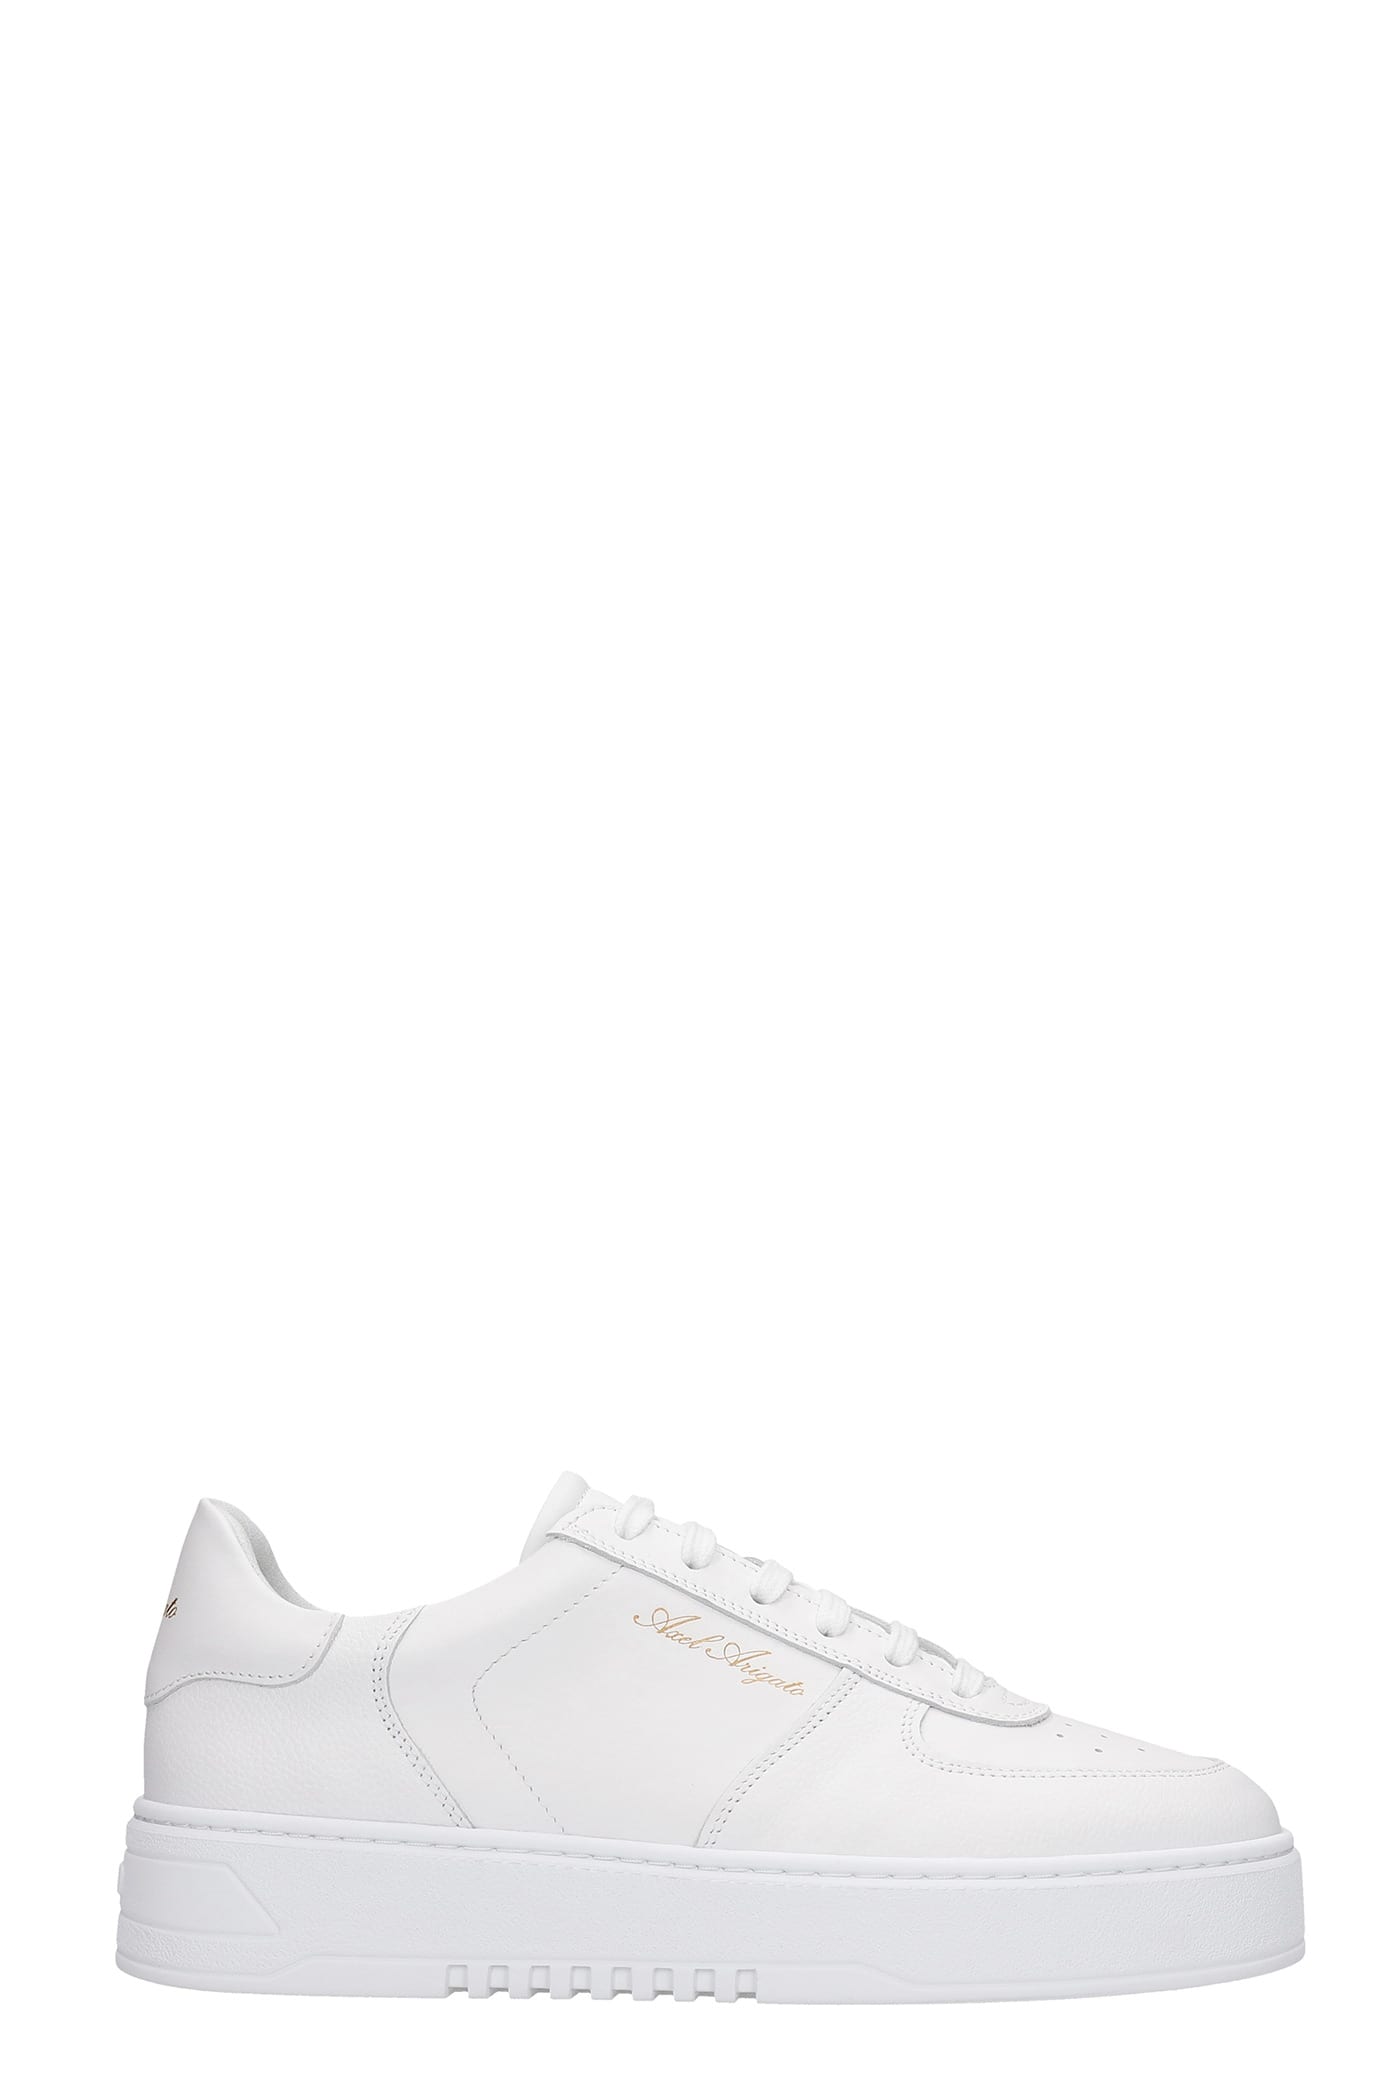 AXEL ARIGATO ORBIT trainers IN WHITE LEATHER,24005